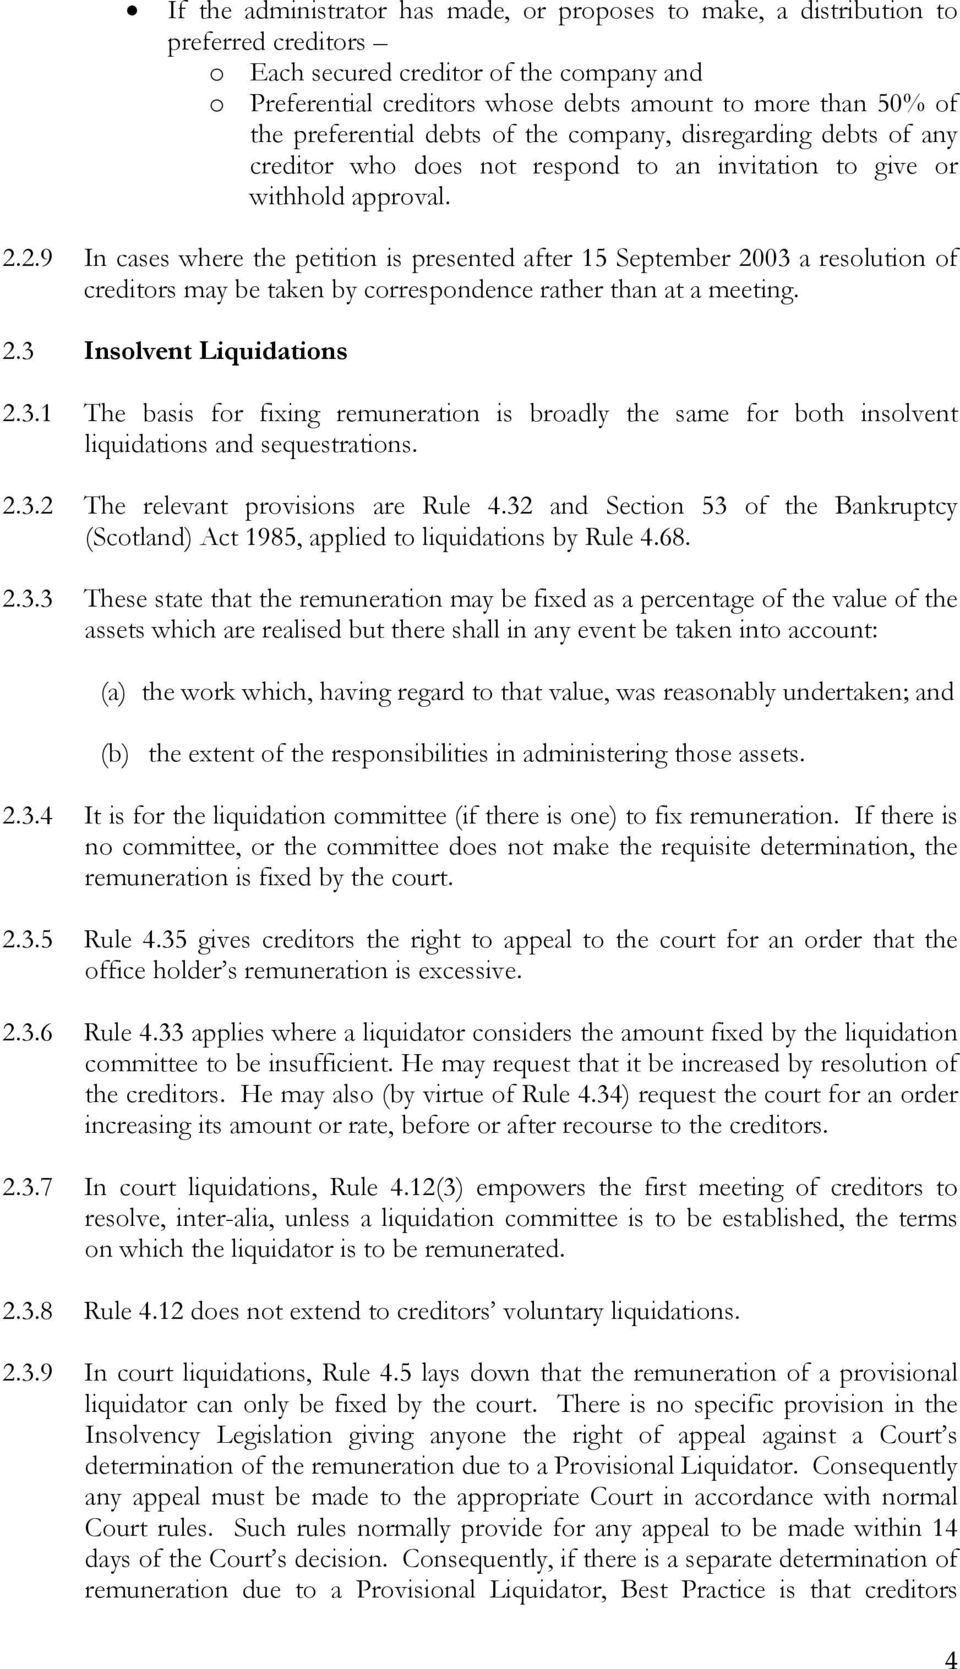 2.9 In cases where the petition is presented after 15 September 2003 a resolution of creditors may be taken by correspondence rather than at a meeting. 2.3 Insolvent Liquidations 2.3.1 The basis for fixing remuneration is broadly the same for both insolvent liquidations and sequestrations.